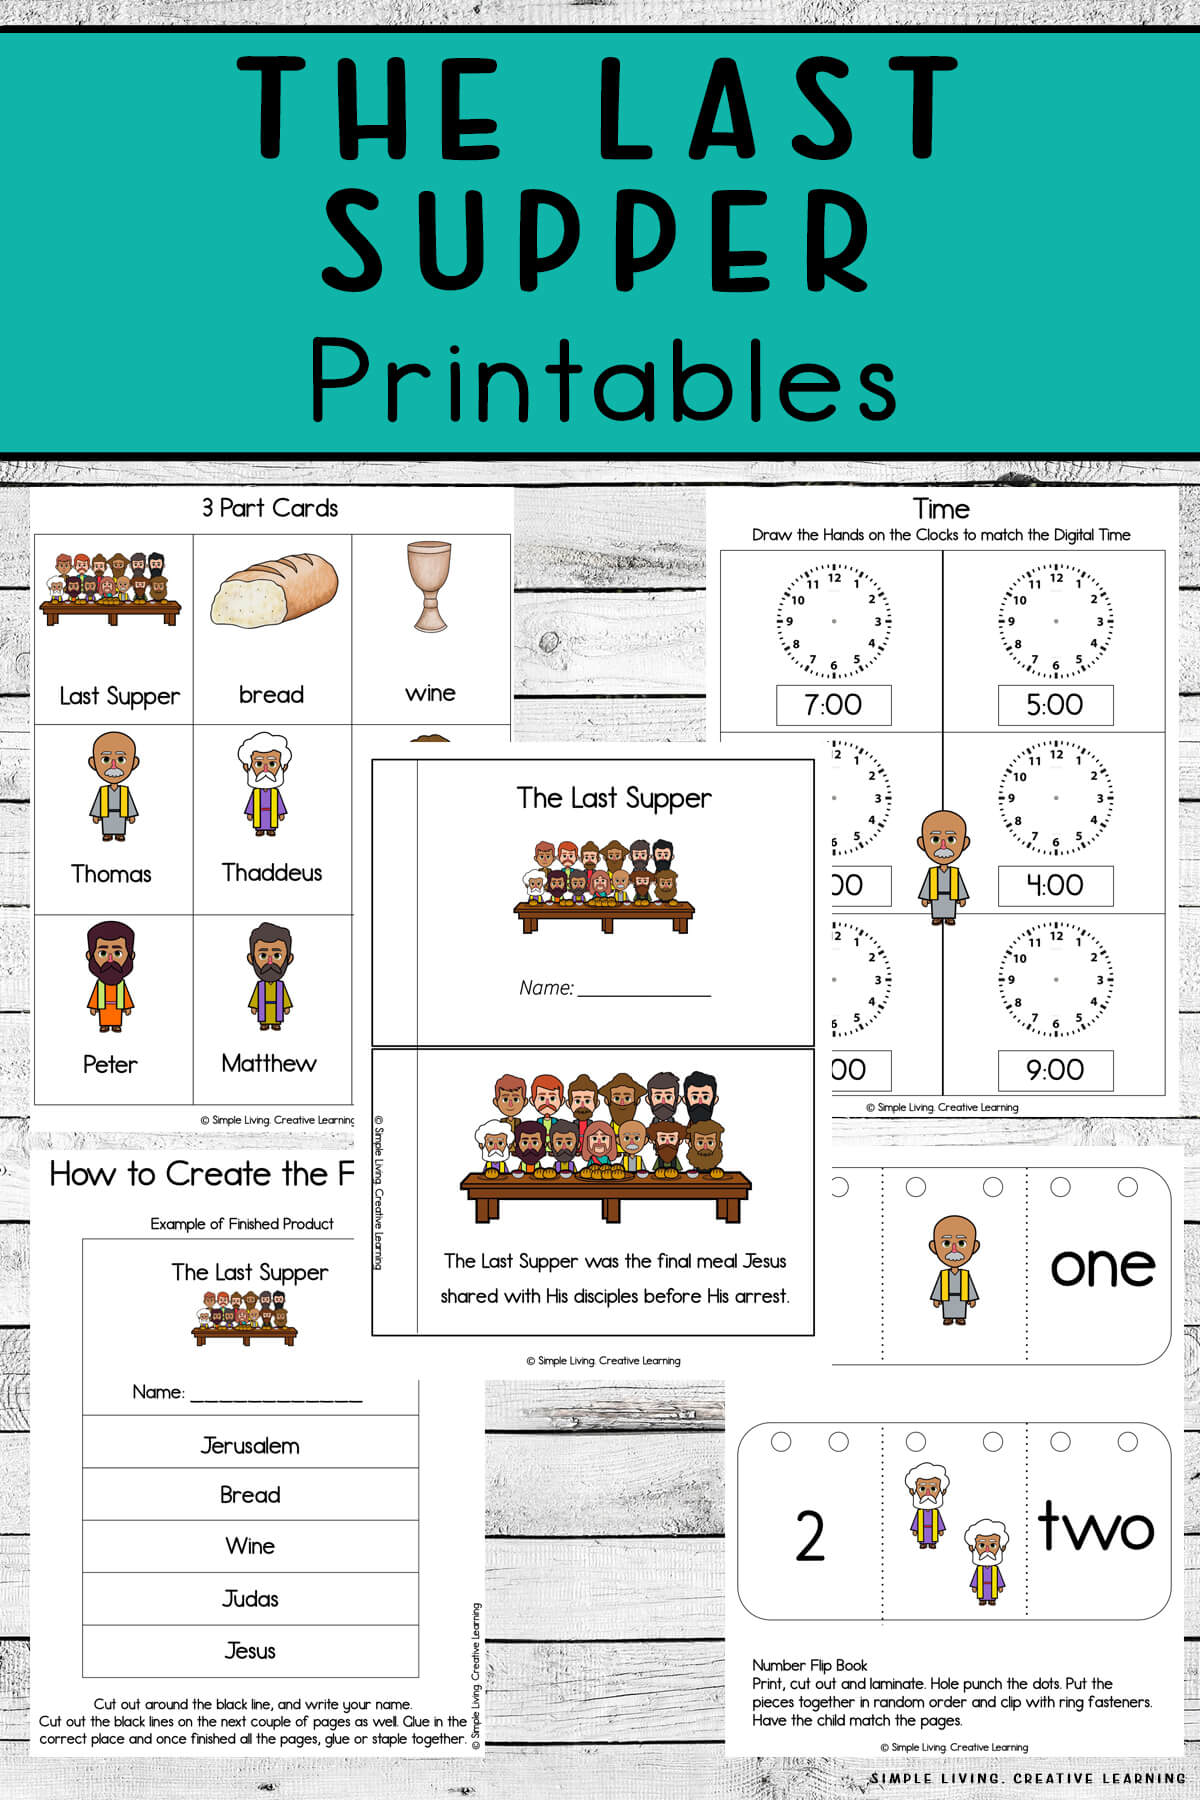 The Last Supper Printables